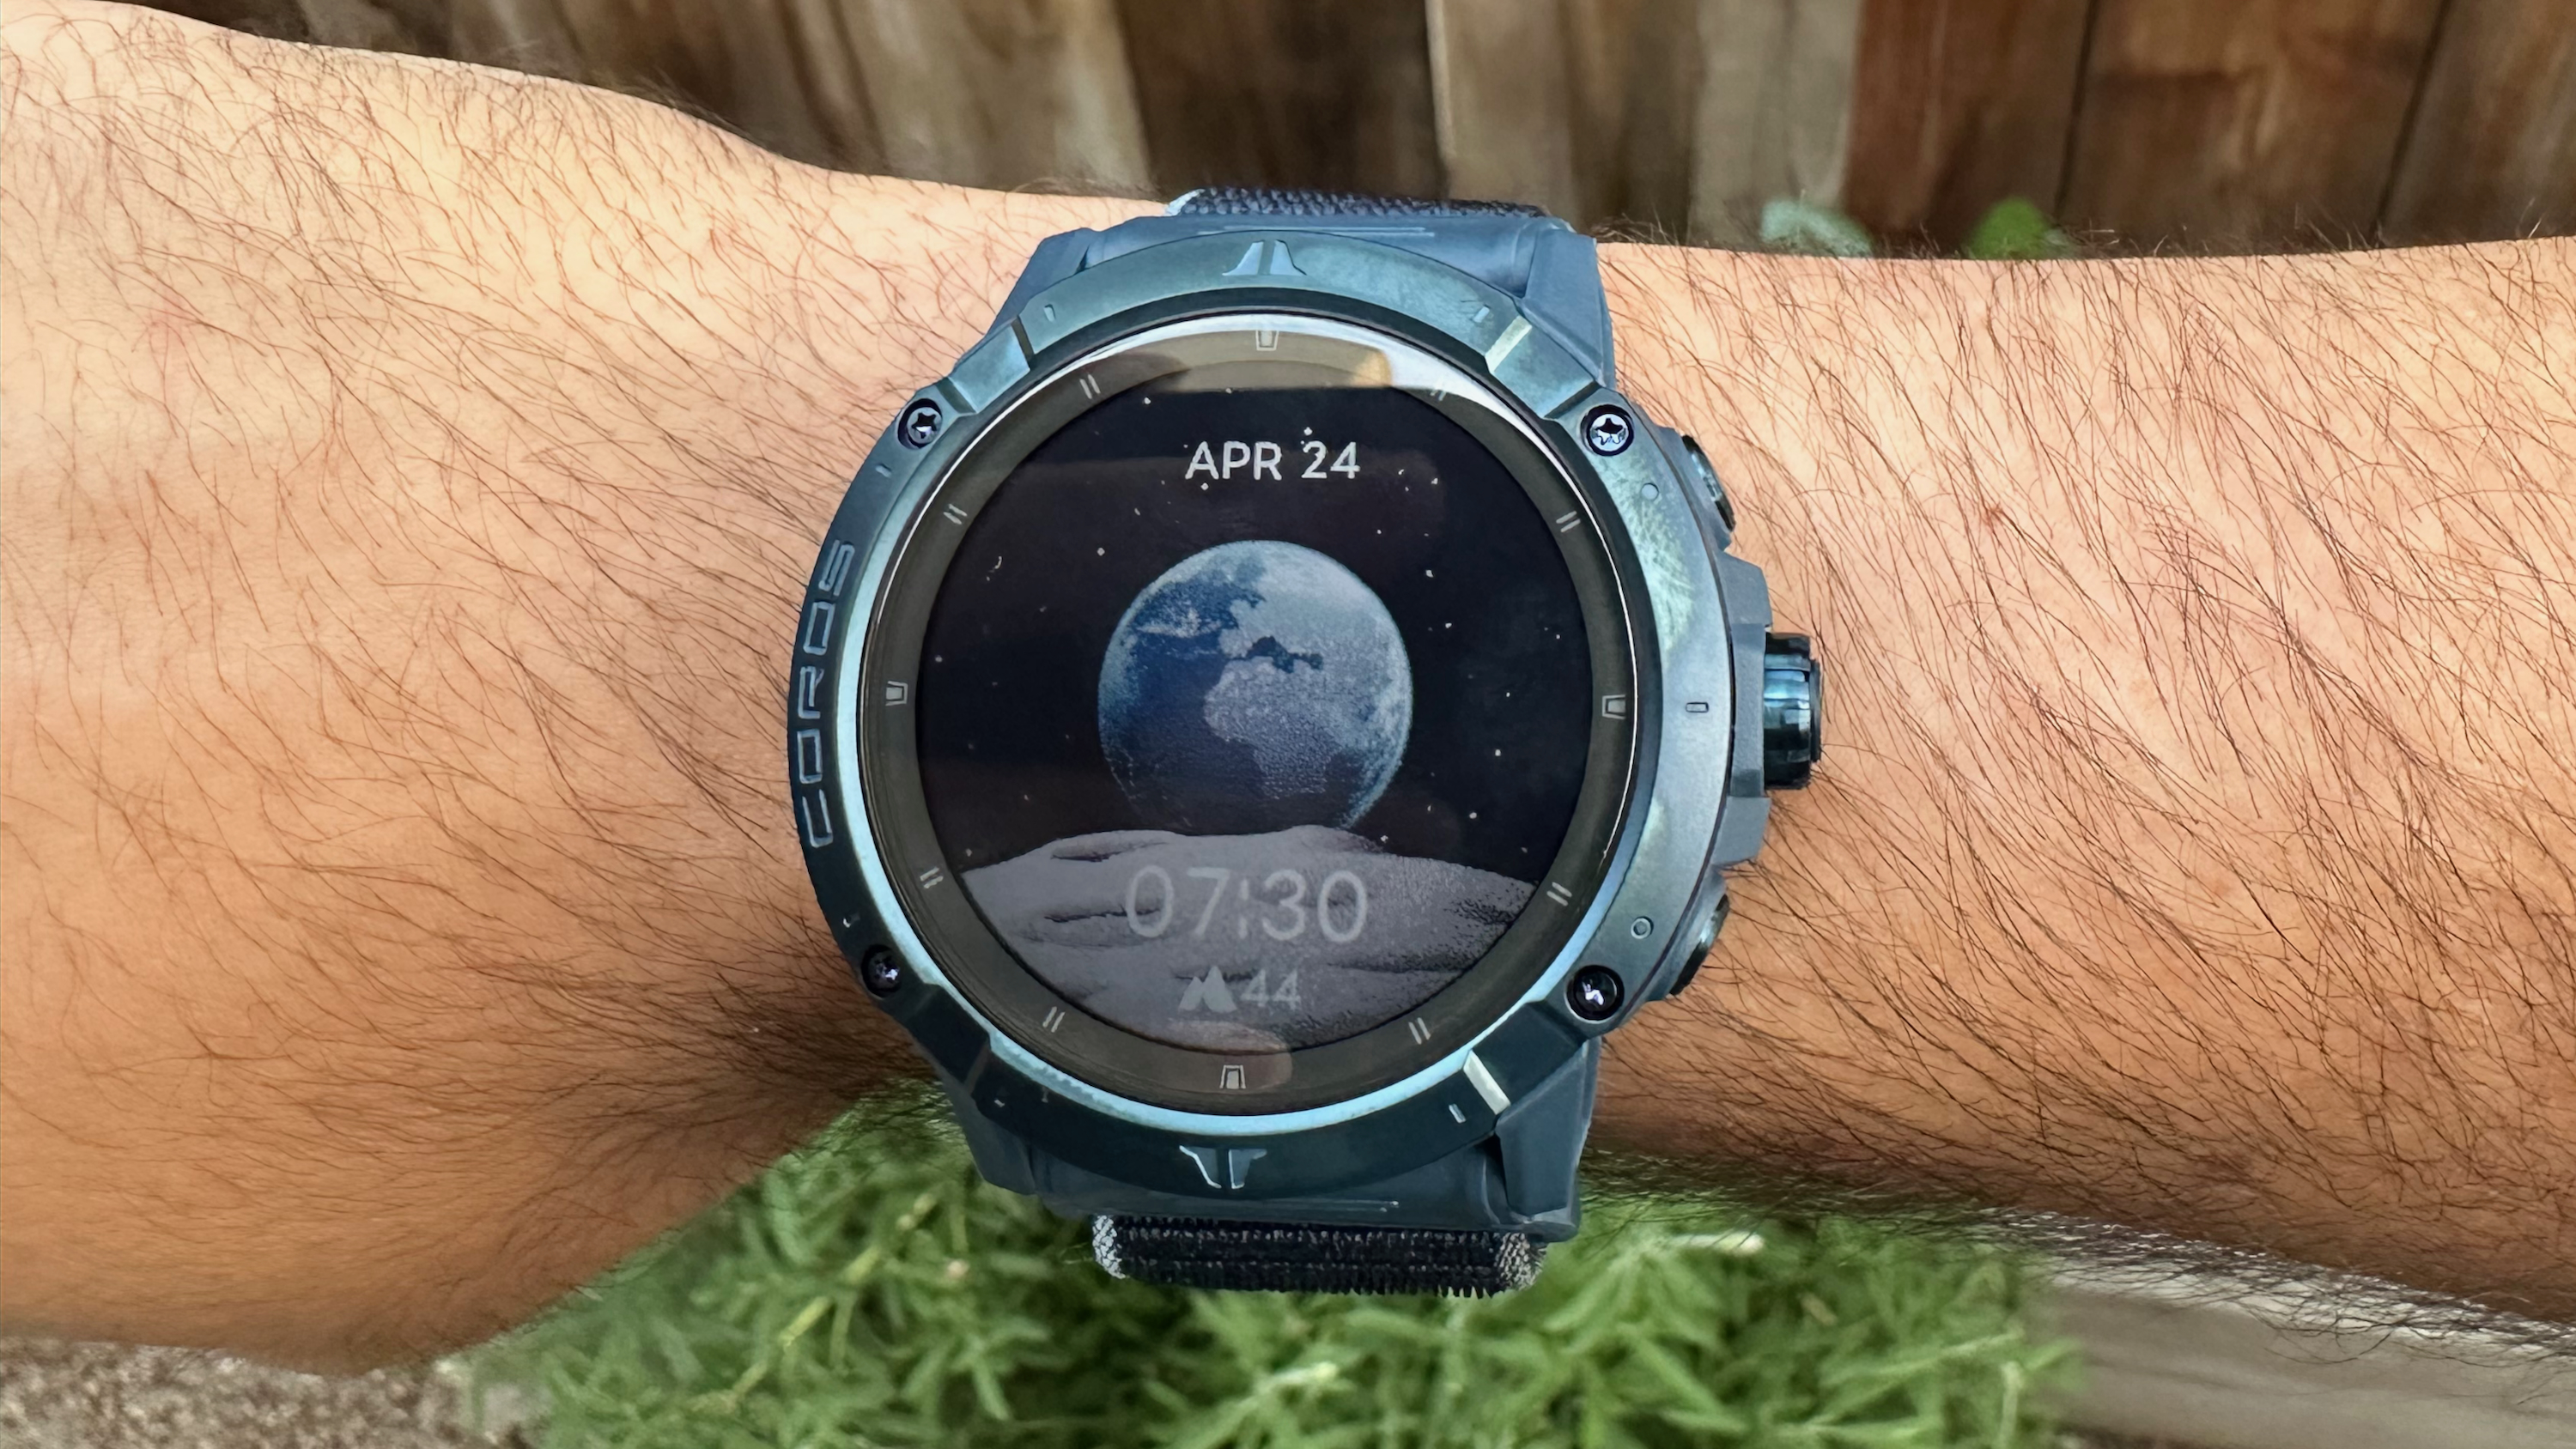 Close-up of the Earth watch face on the COROS VERTIX 2S